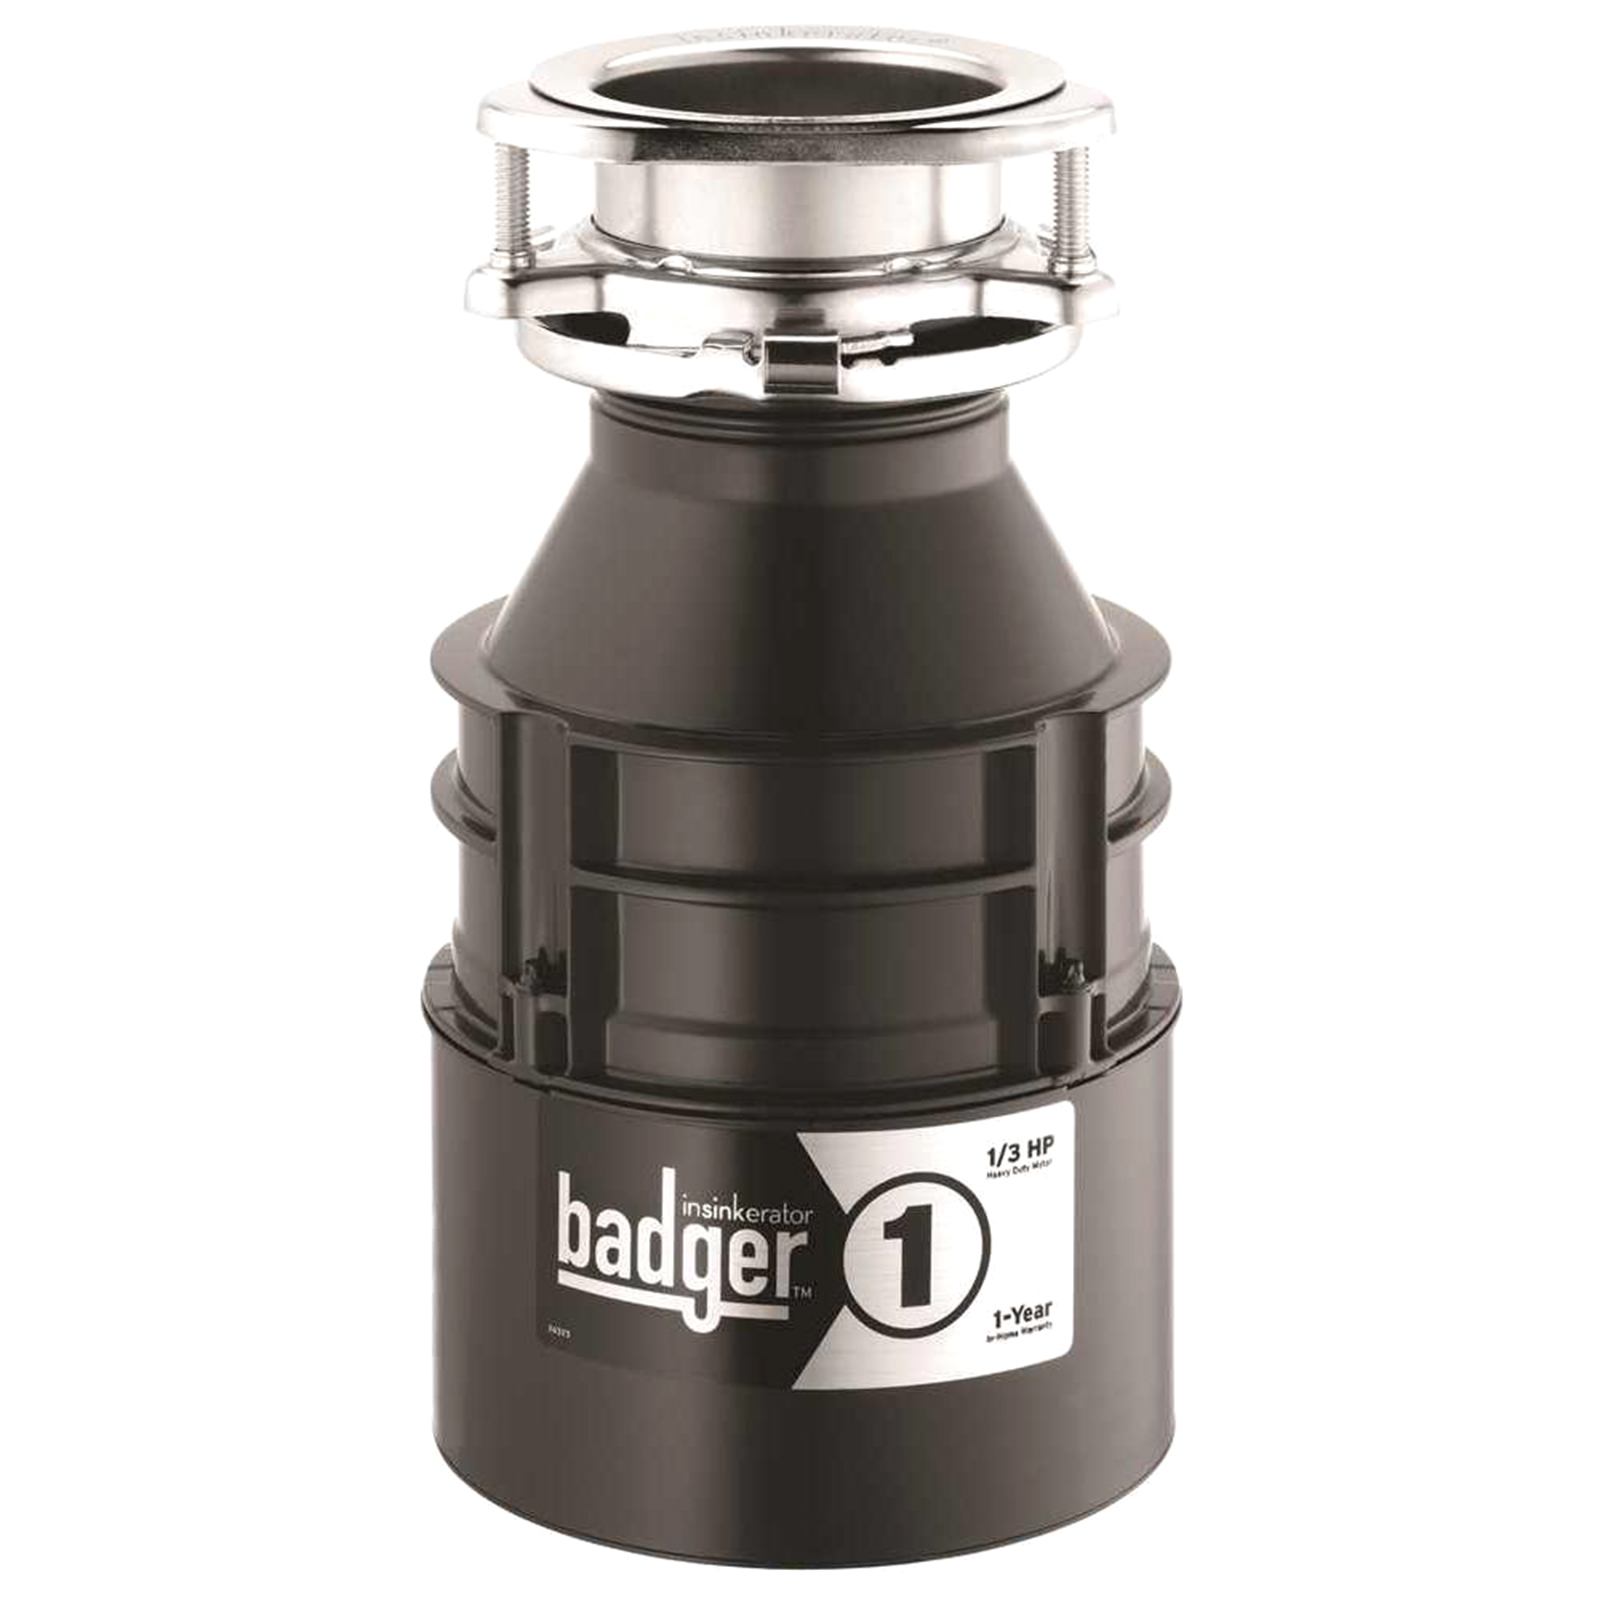 Insinkerator BADGER1WC  1/3HP Household Food Waste Disposer with Cord - Gray